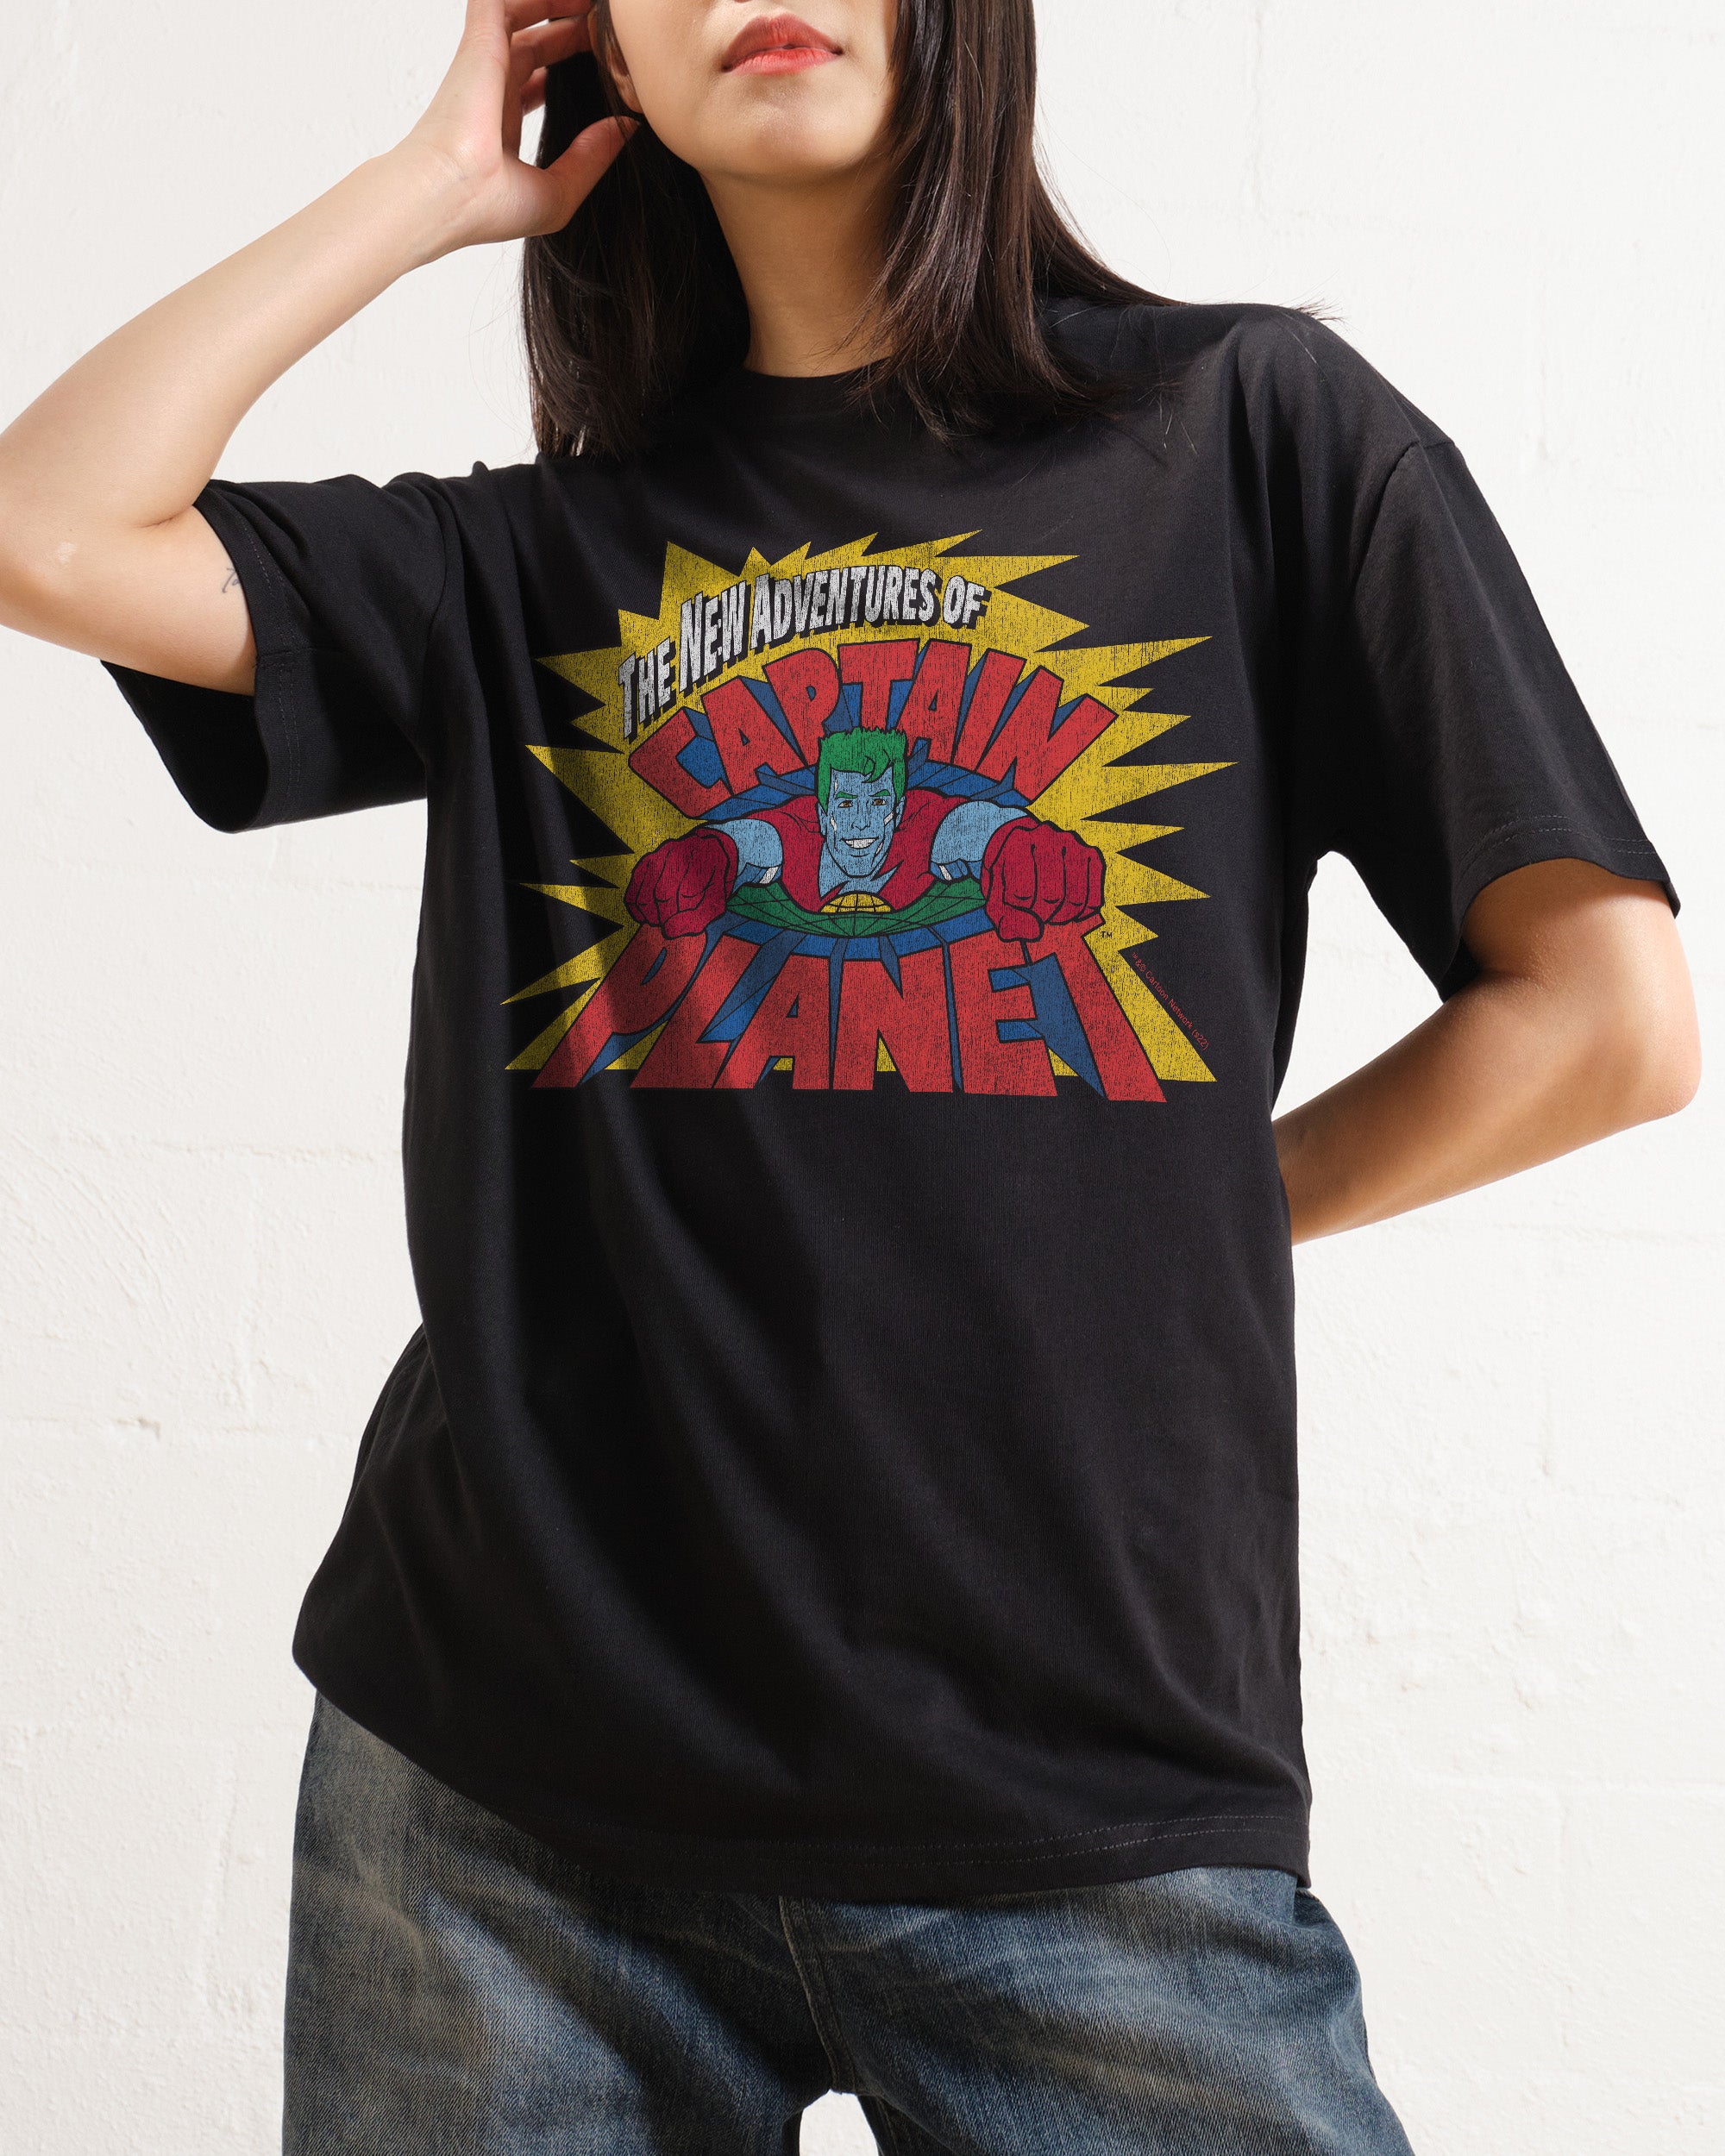 The New Adventures of Captain Planet T-Shirt